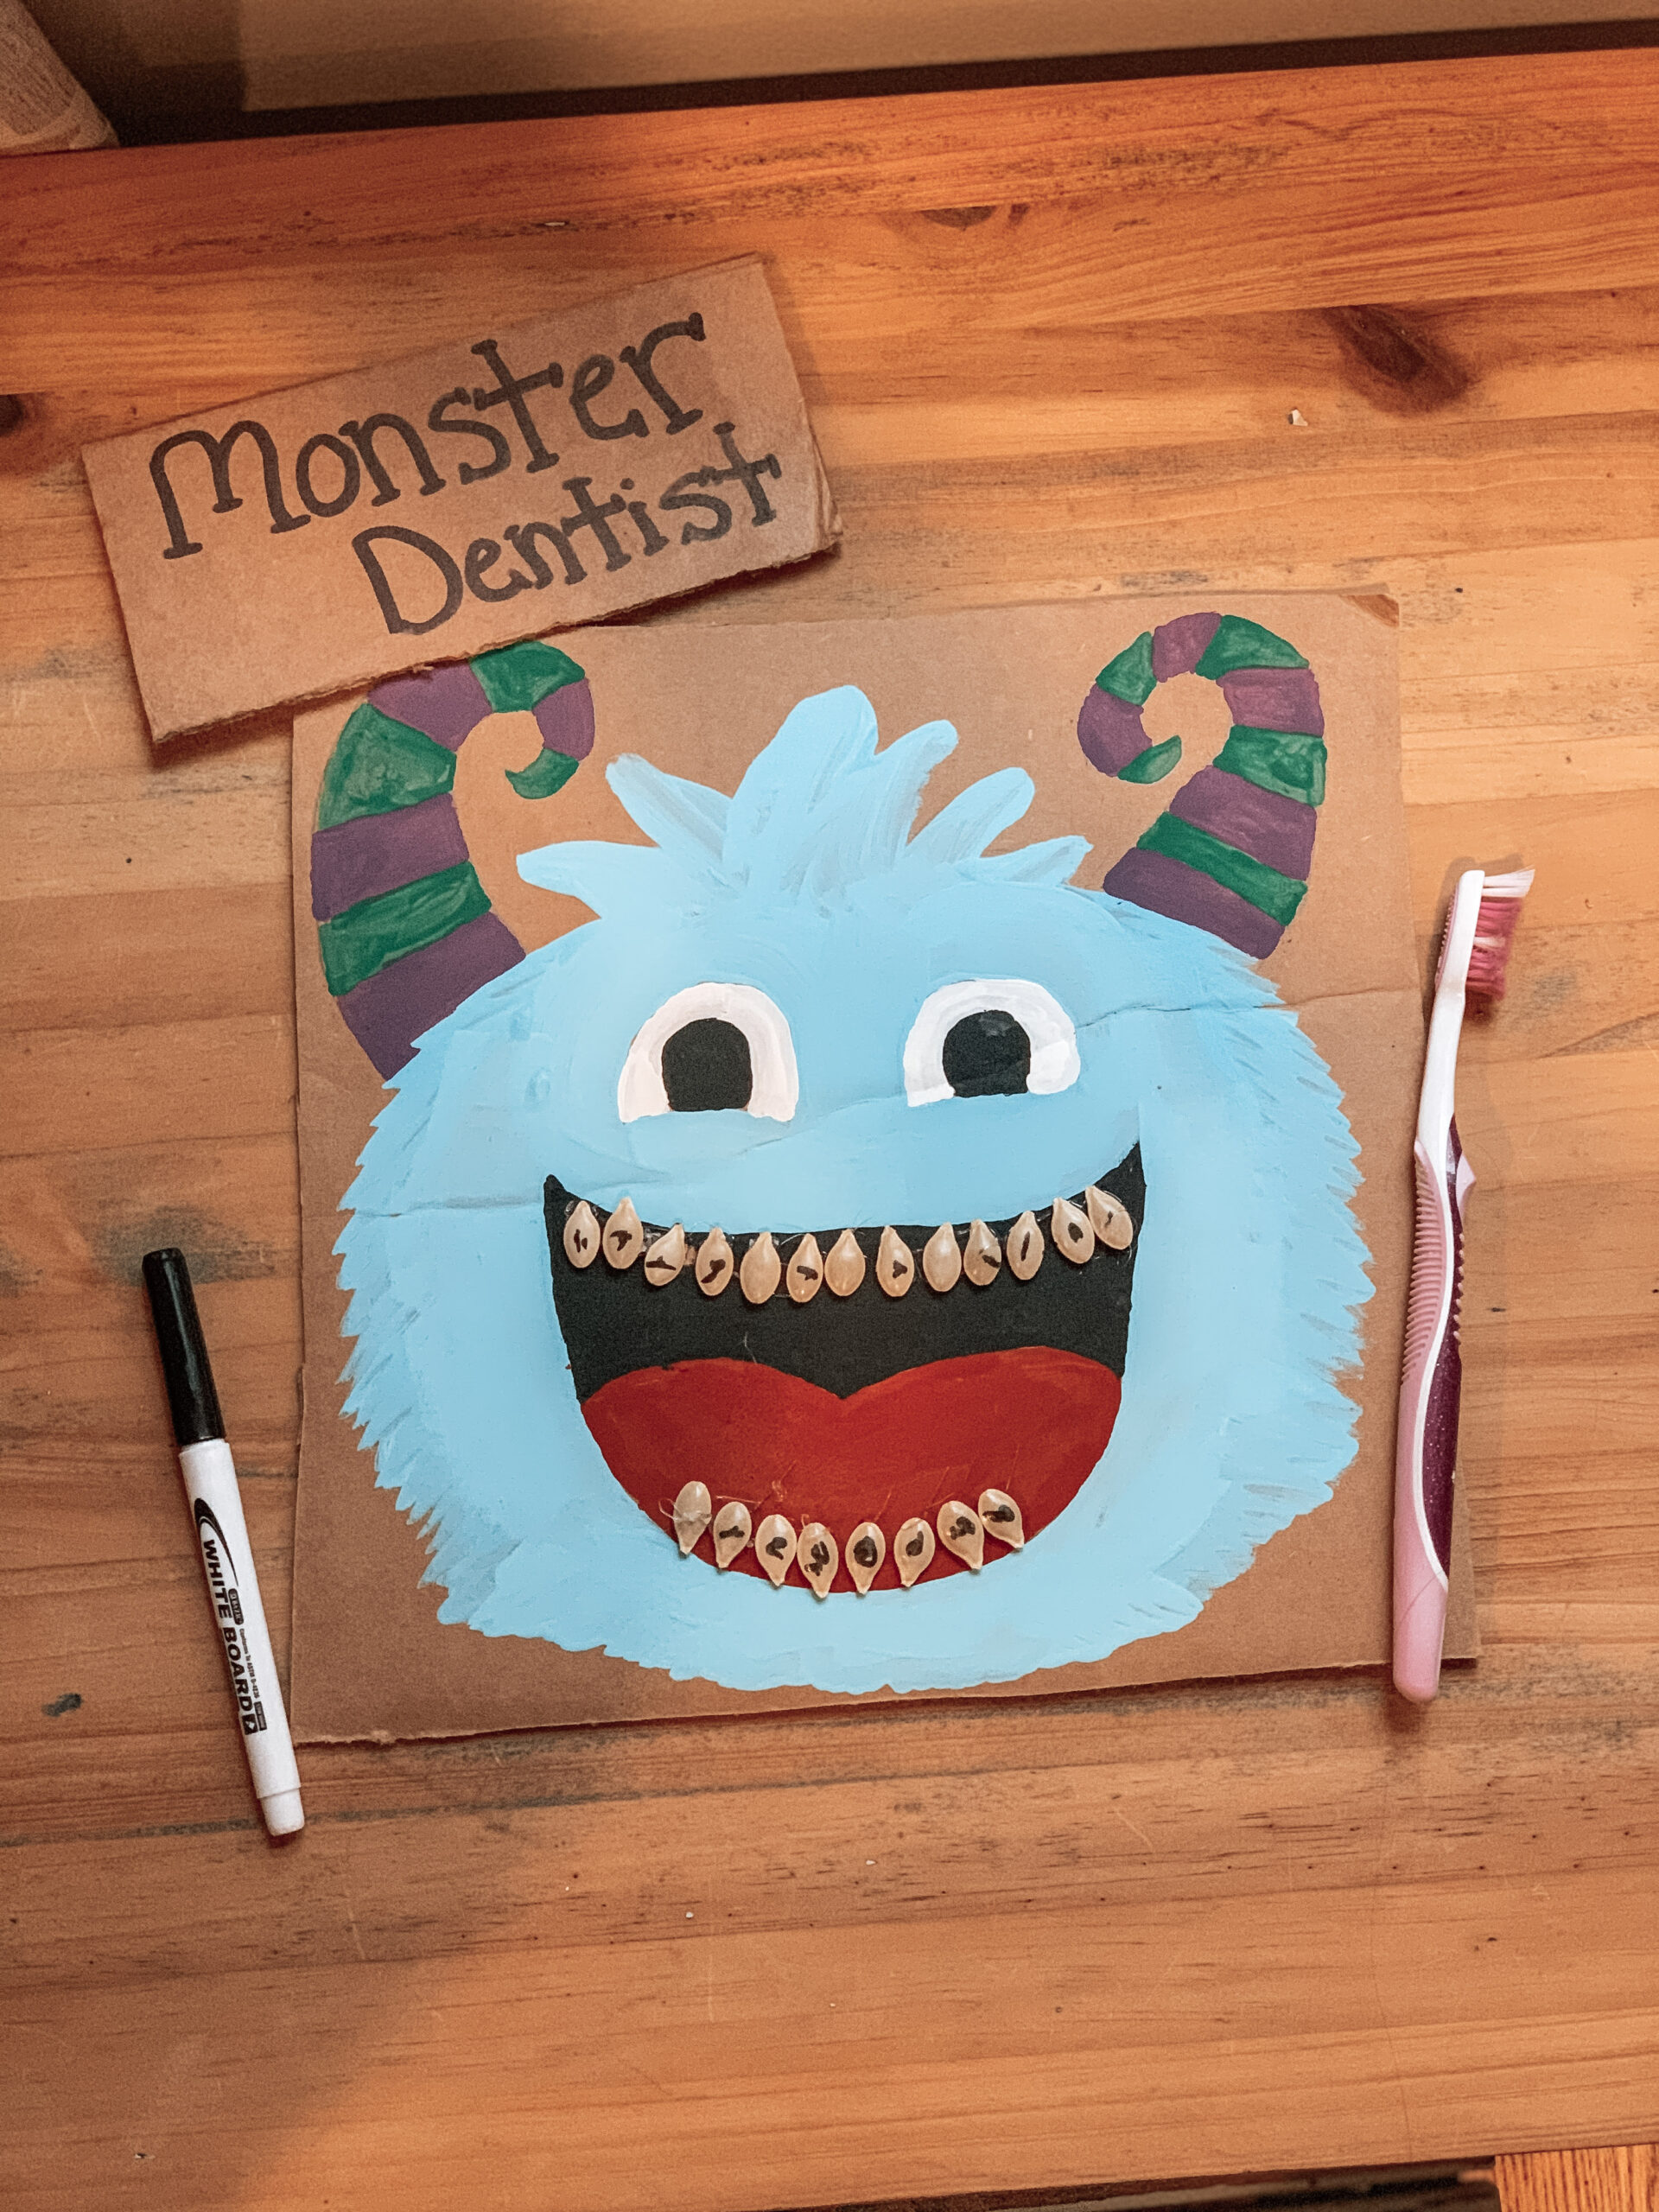 Monster Dentist demonstrating completed repurposed craft for kid's activities with toothbrush and marker pen for kids to play with.